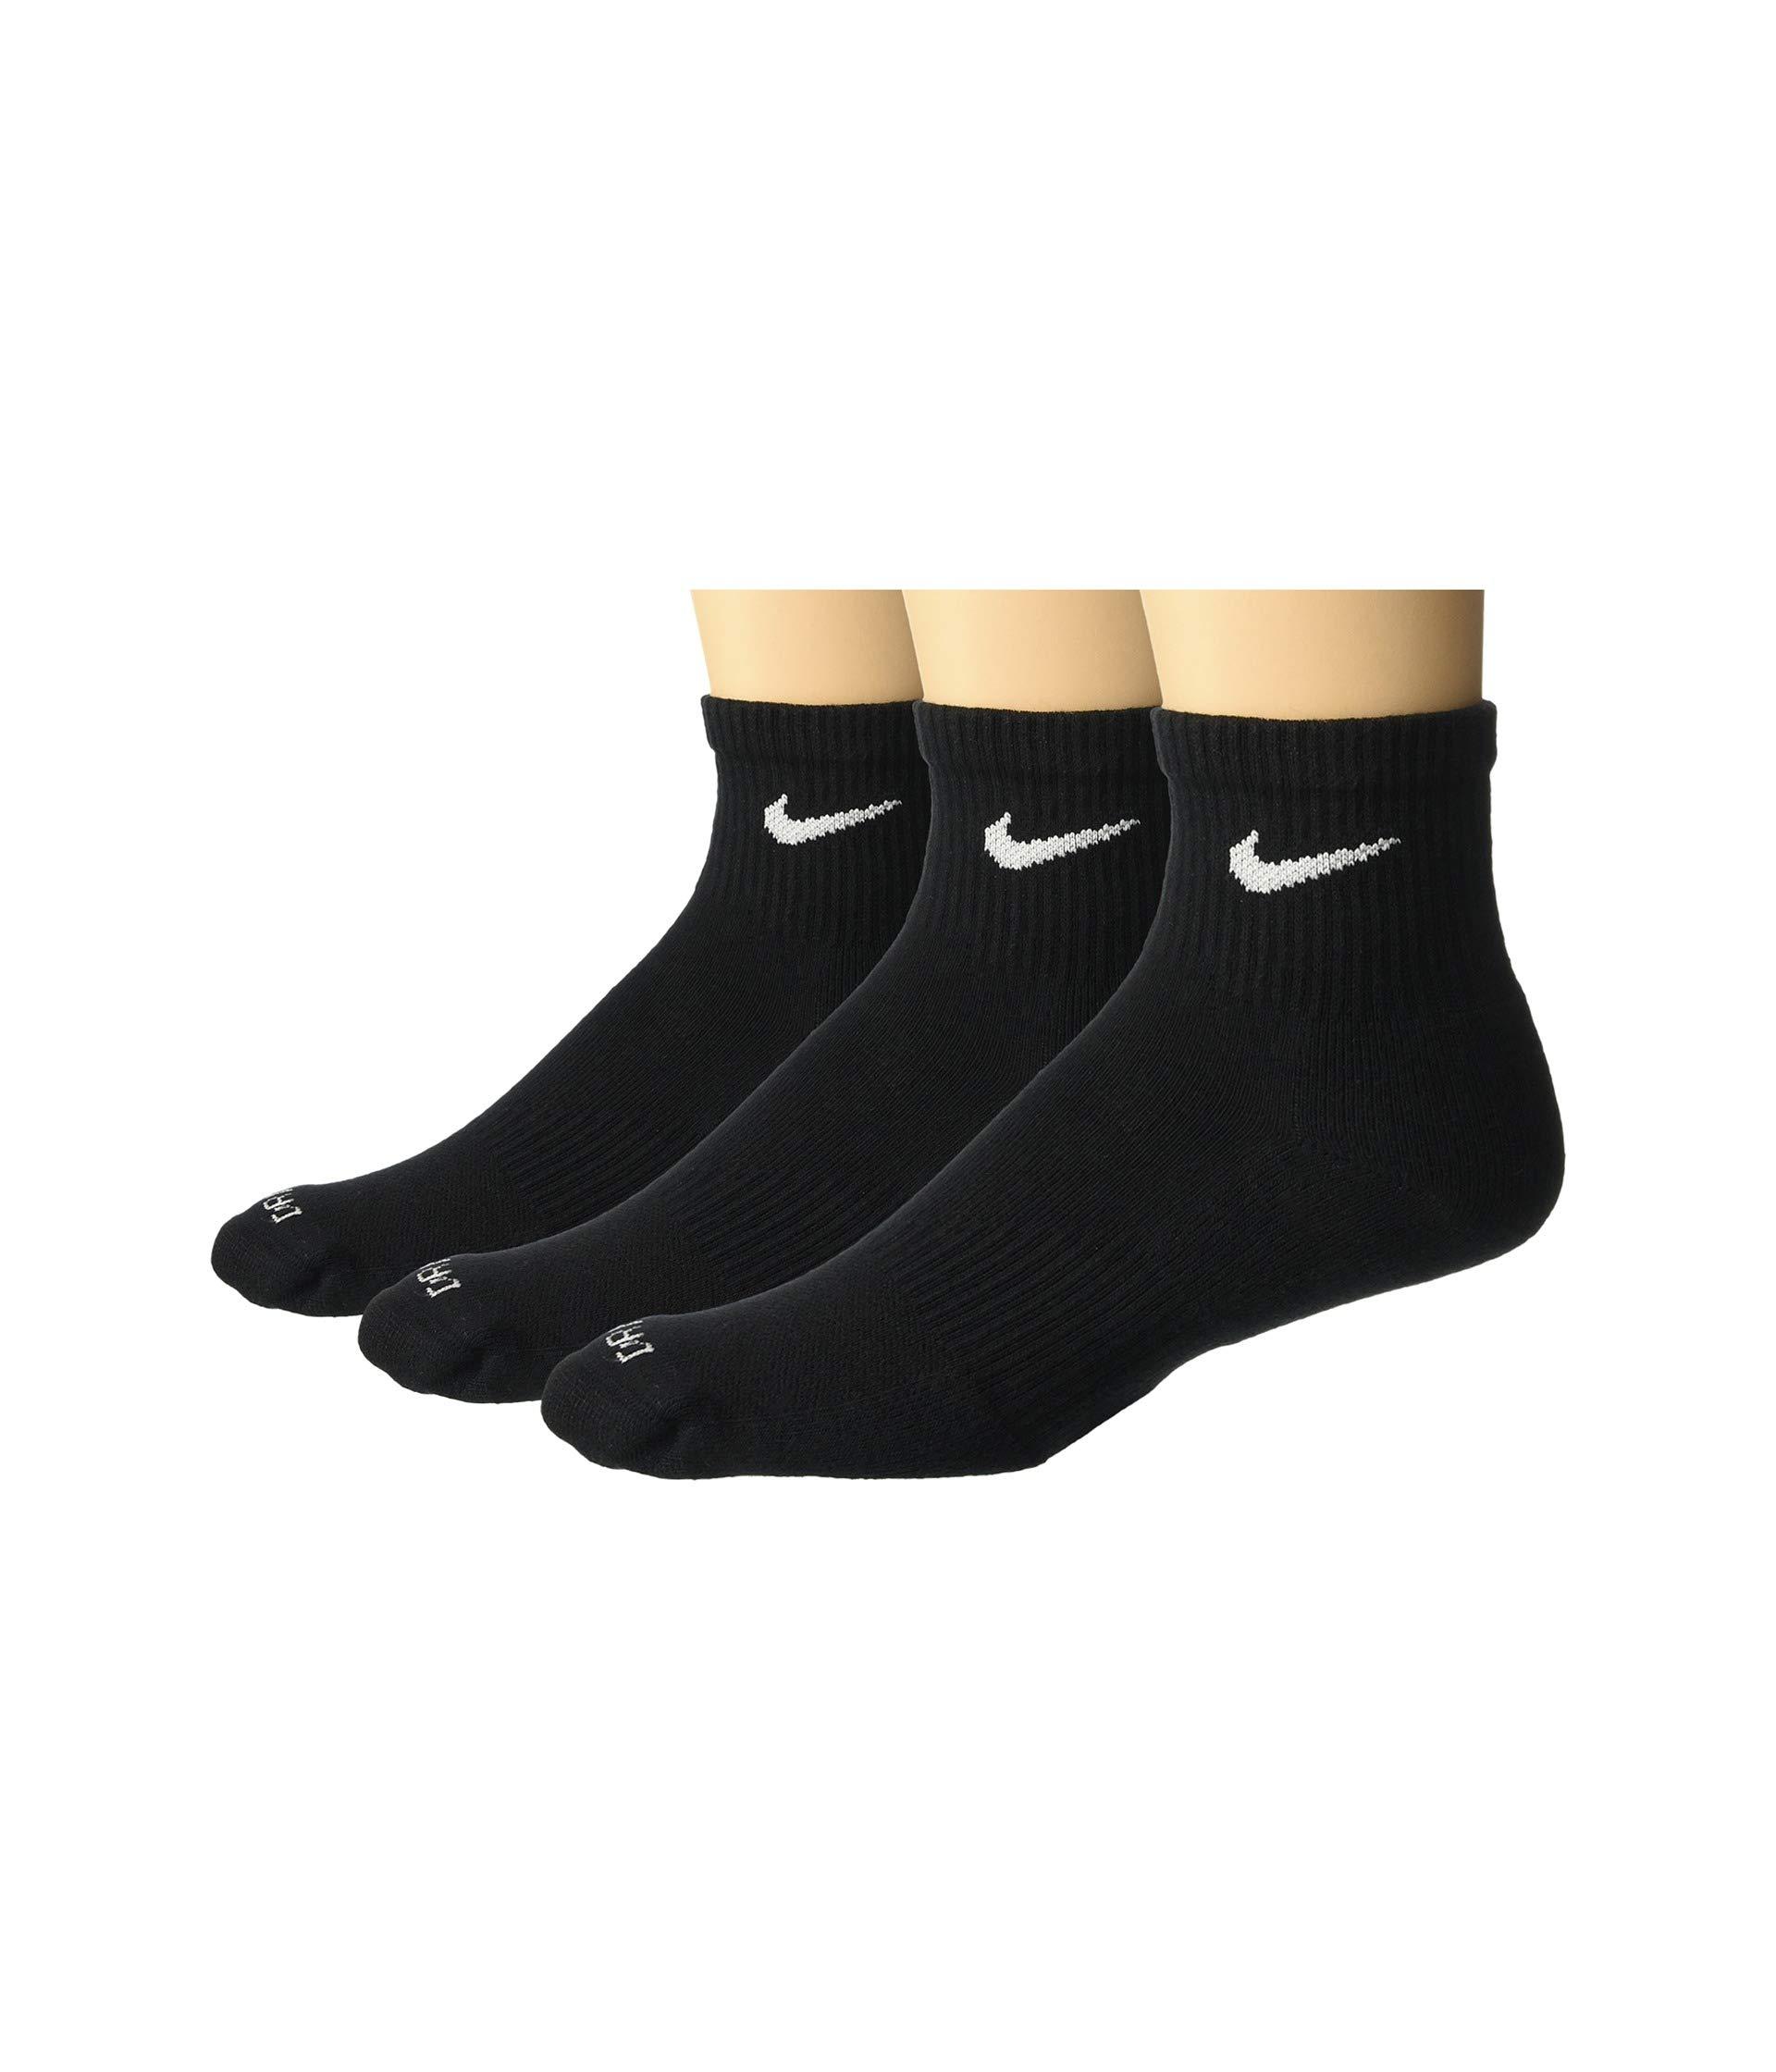 Nike Cotton Everyday Plus Cushion Ankle Socks 3-pair Pack in Black - Lyst